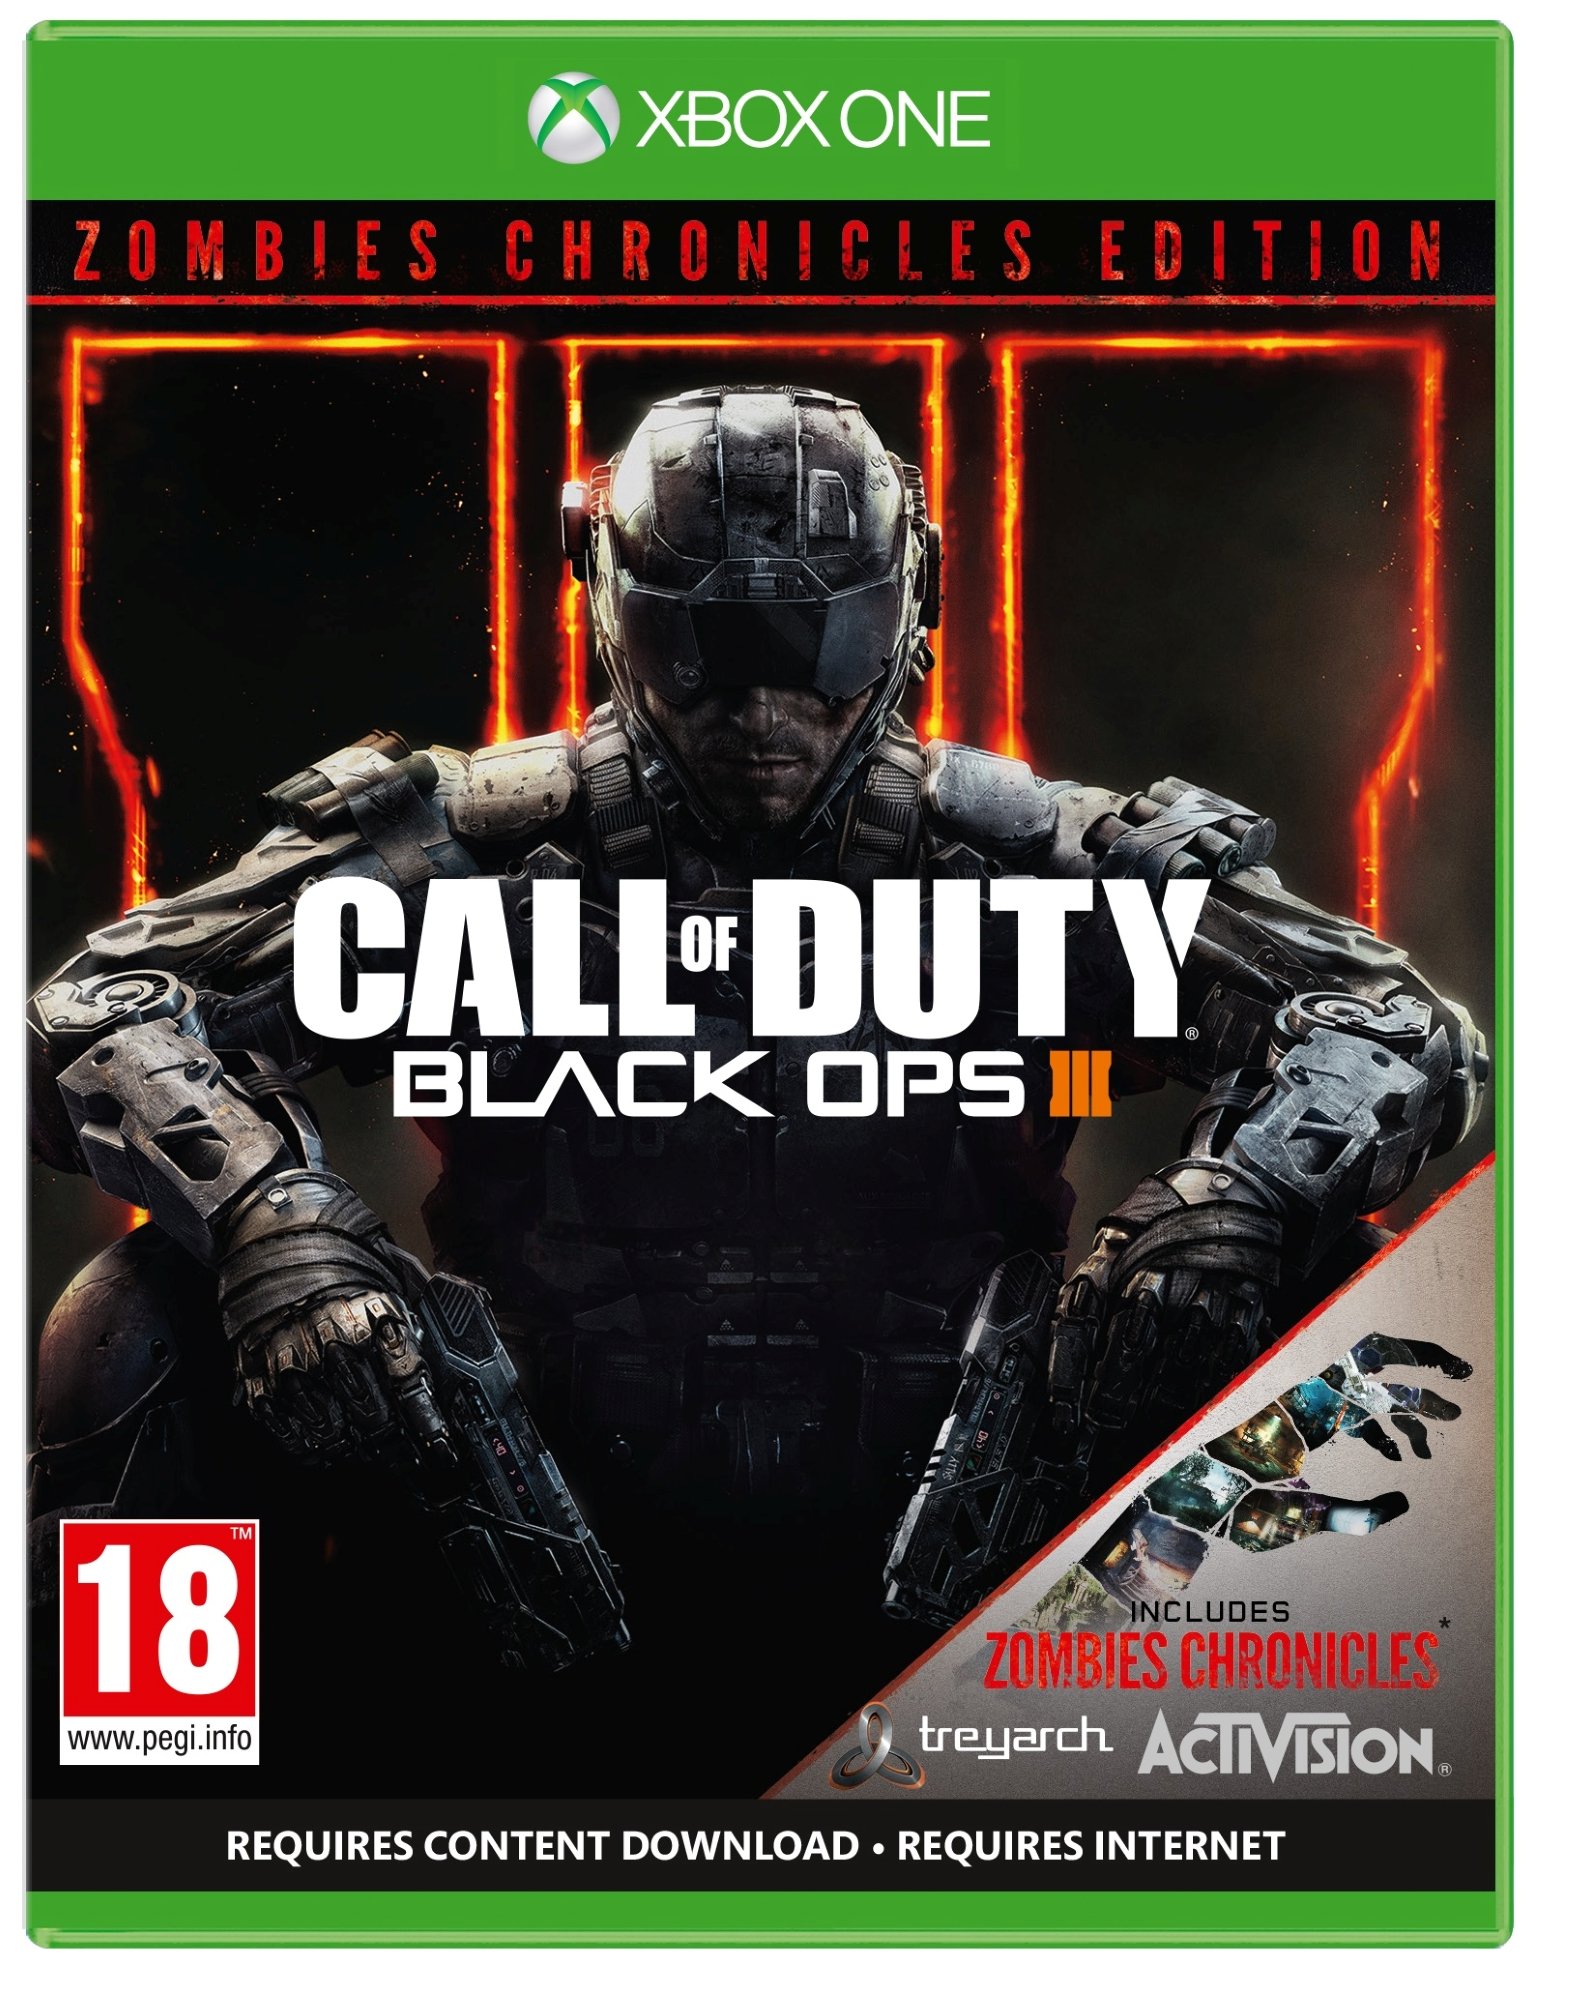 cod black ops 3 zombie chronicles edition